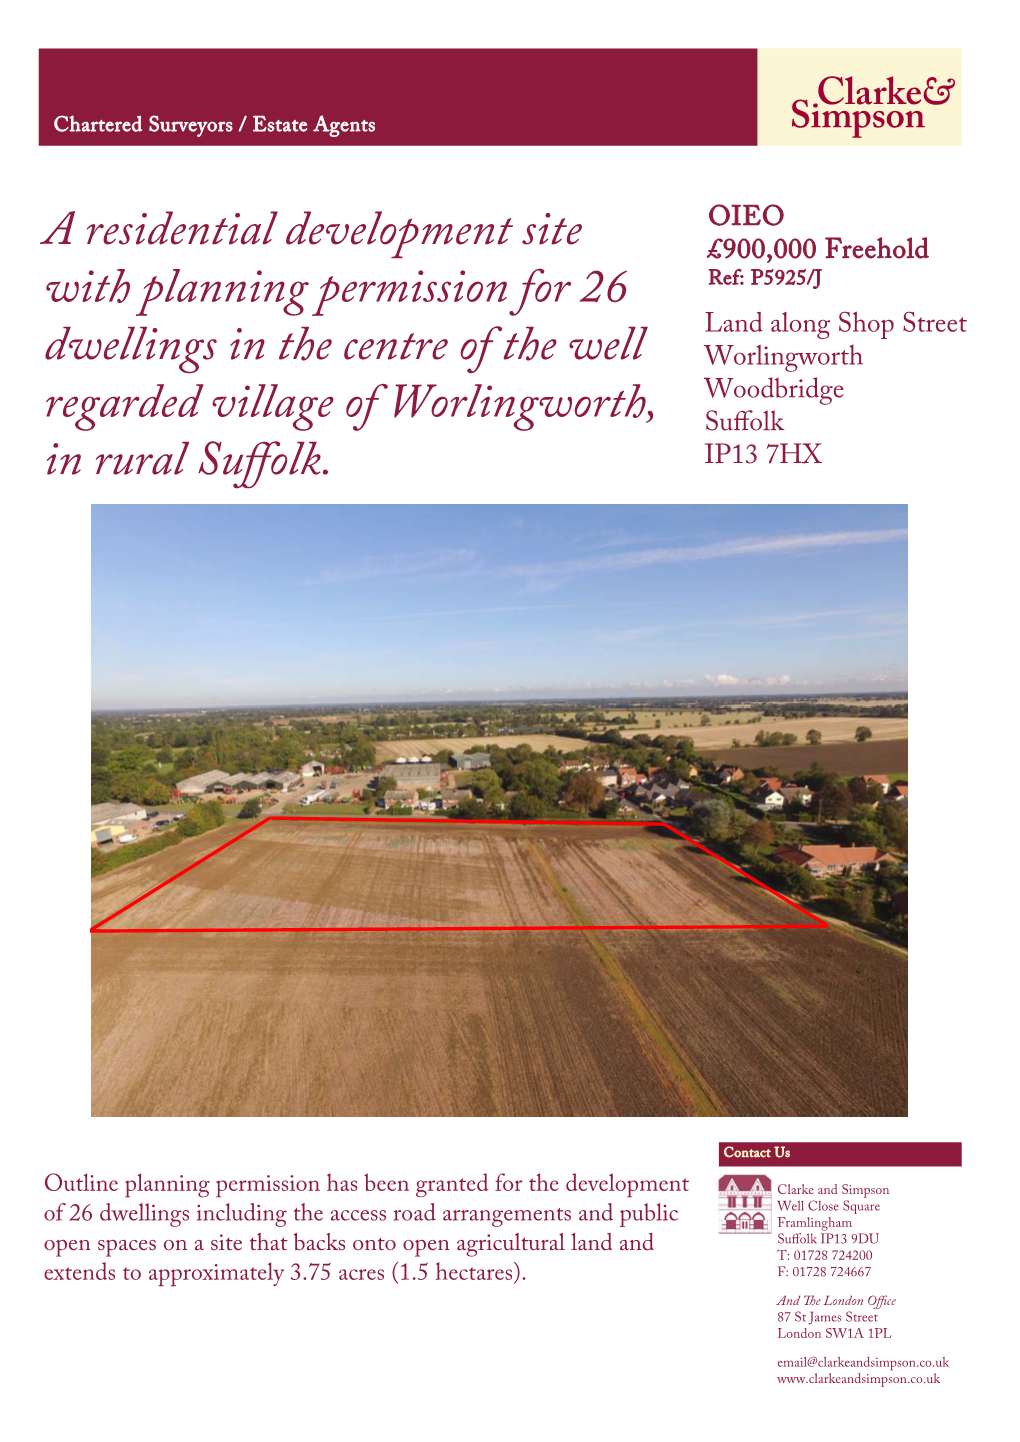 A Residential Development Site with Planning Permission for 26